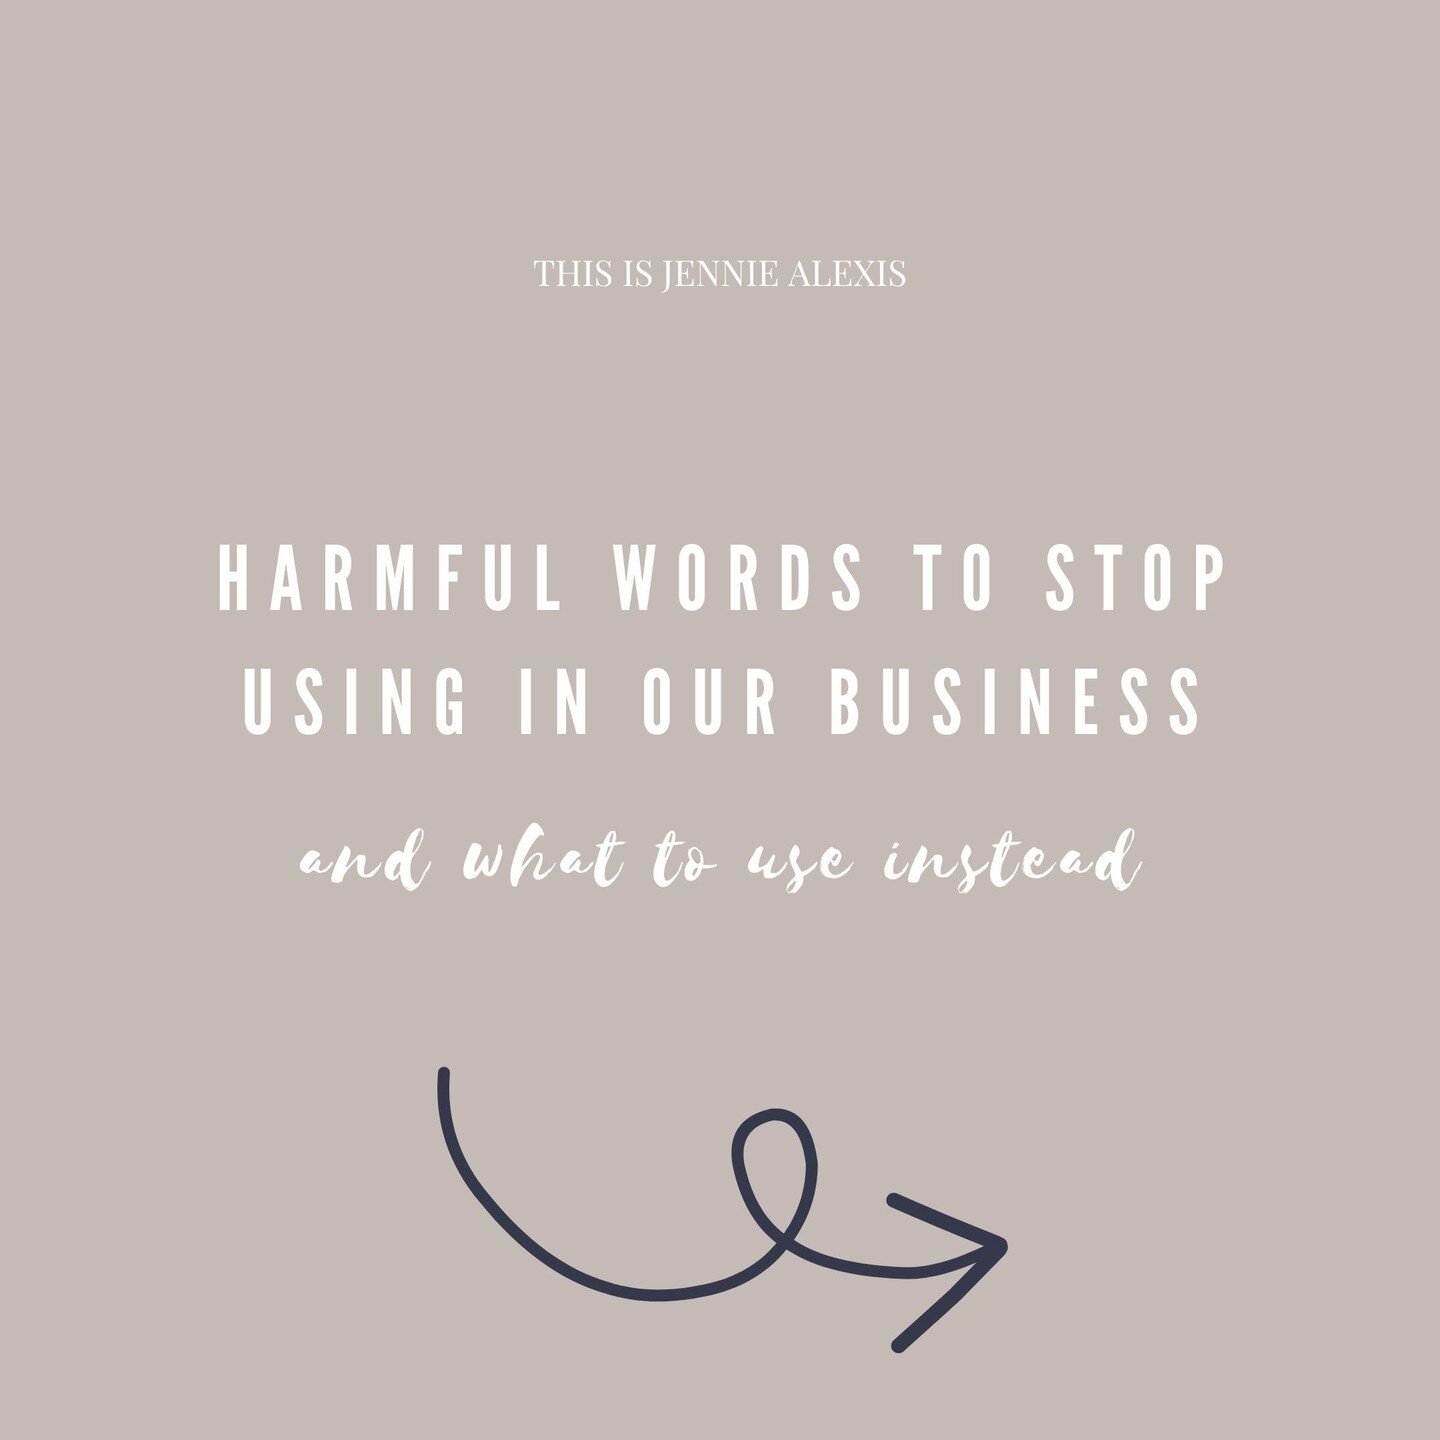 Let's talk about the language we use in marketing and how it can exclude others and create harm. Did you know that there are words and phrases in the English language that are rooted in racism, colonialism, and patriarchy? ⁠
⁠
Using these words in ou